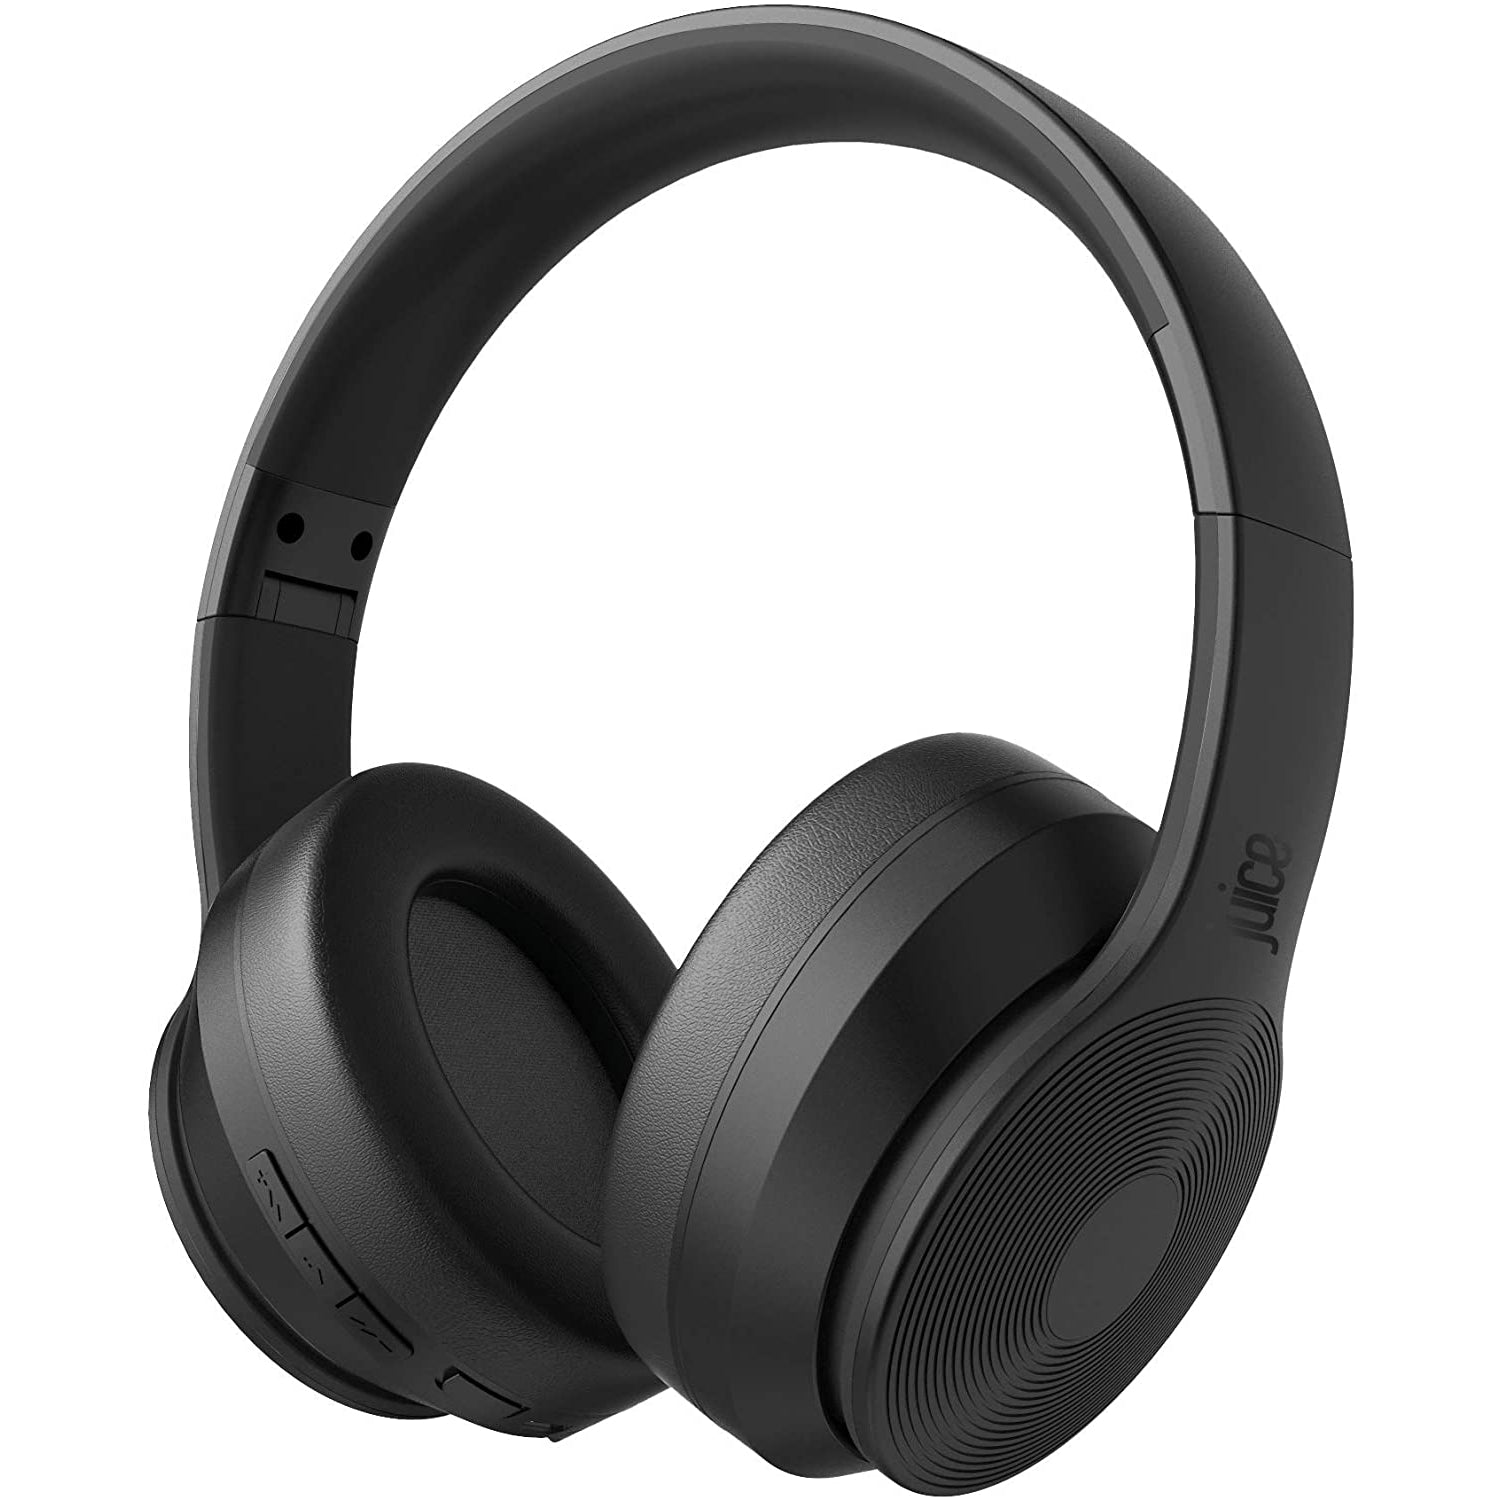 Juice Cans PRO, Active Noise Cancelling True Wireless On-Ear Headphones, Black